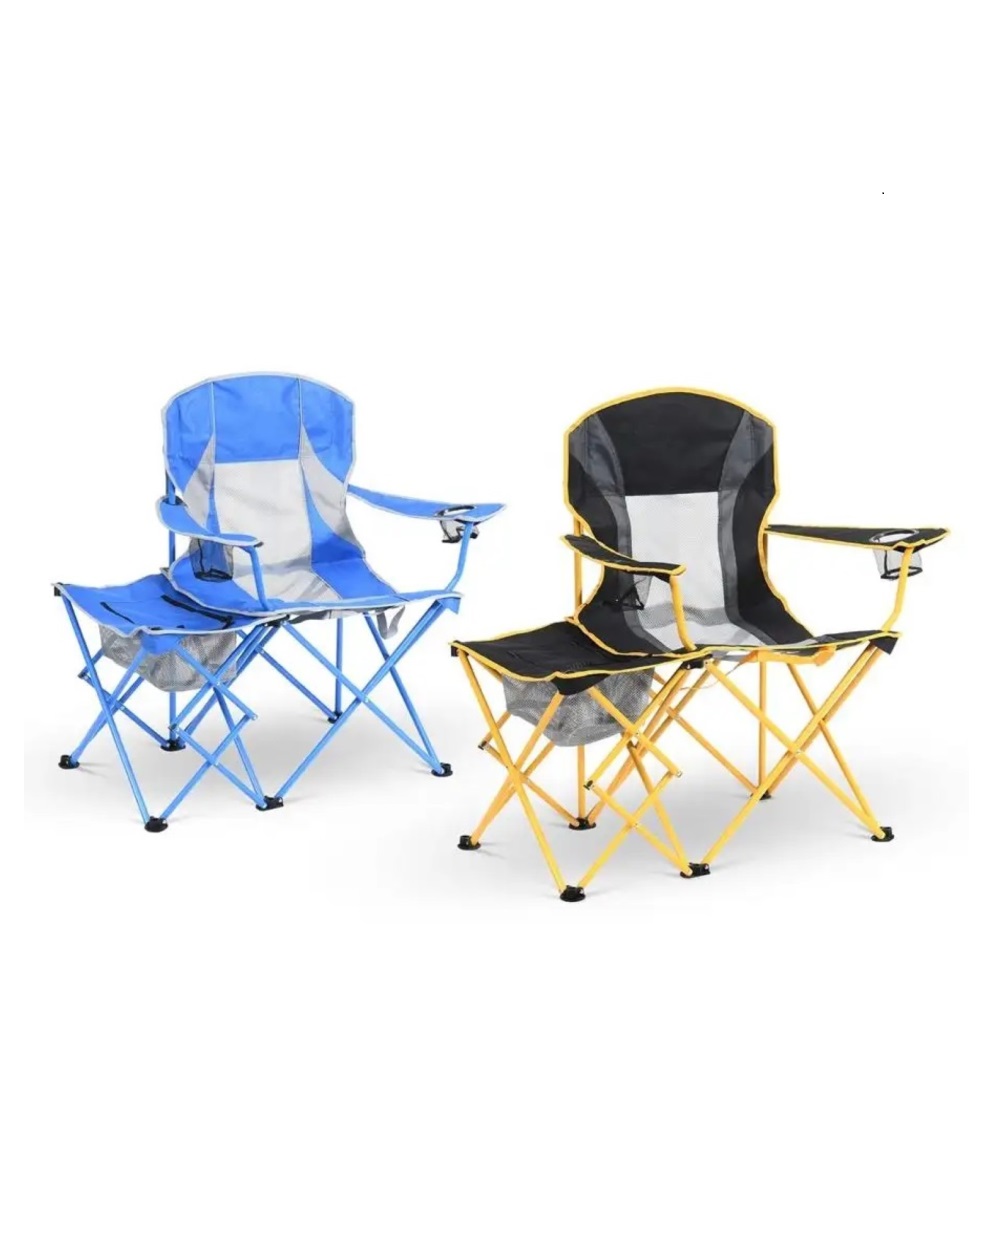 foldablecampingchairwithsidetable blue black 1